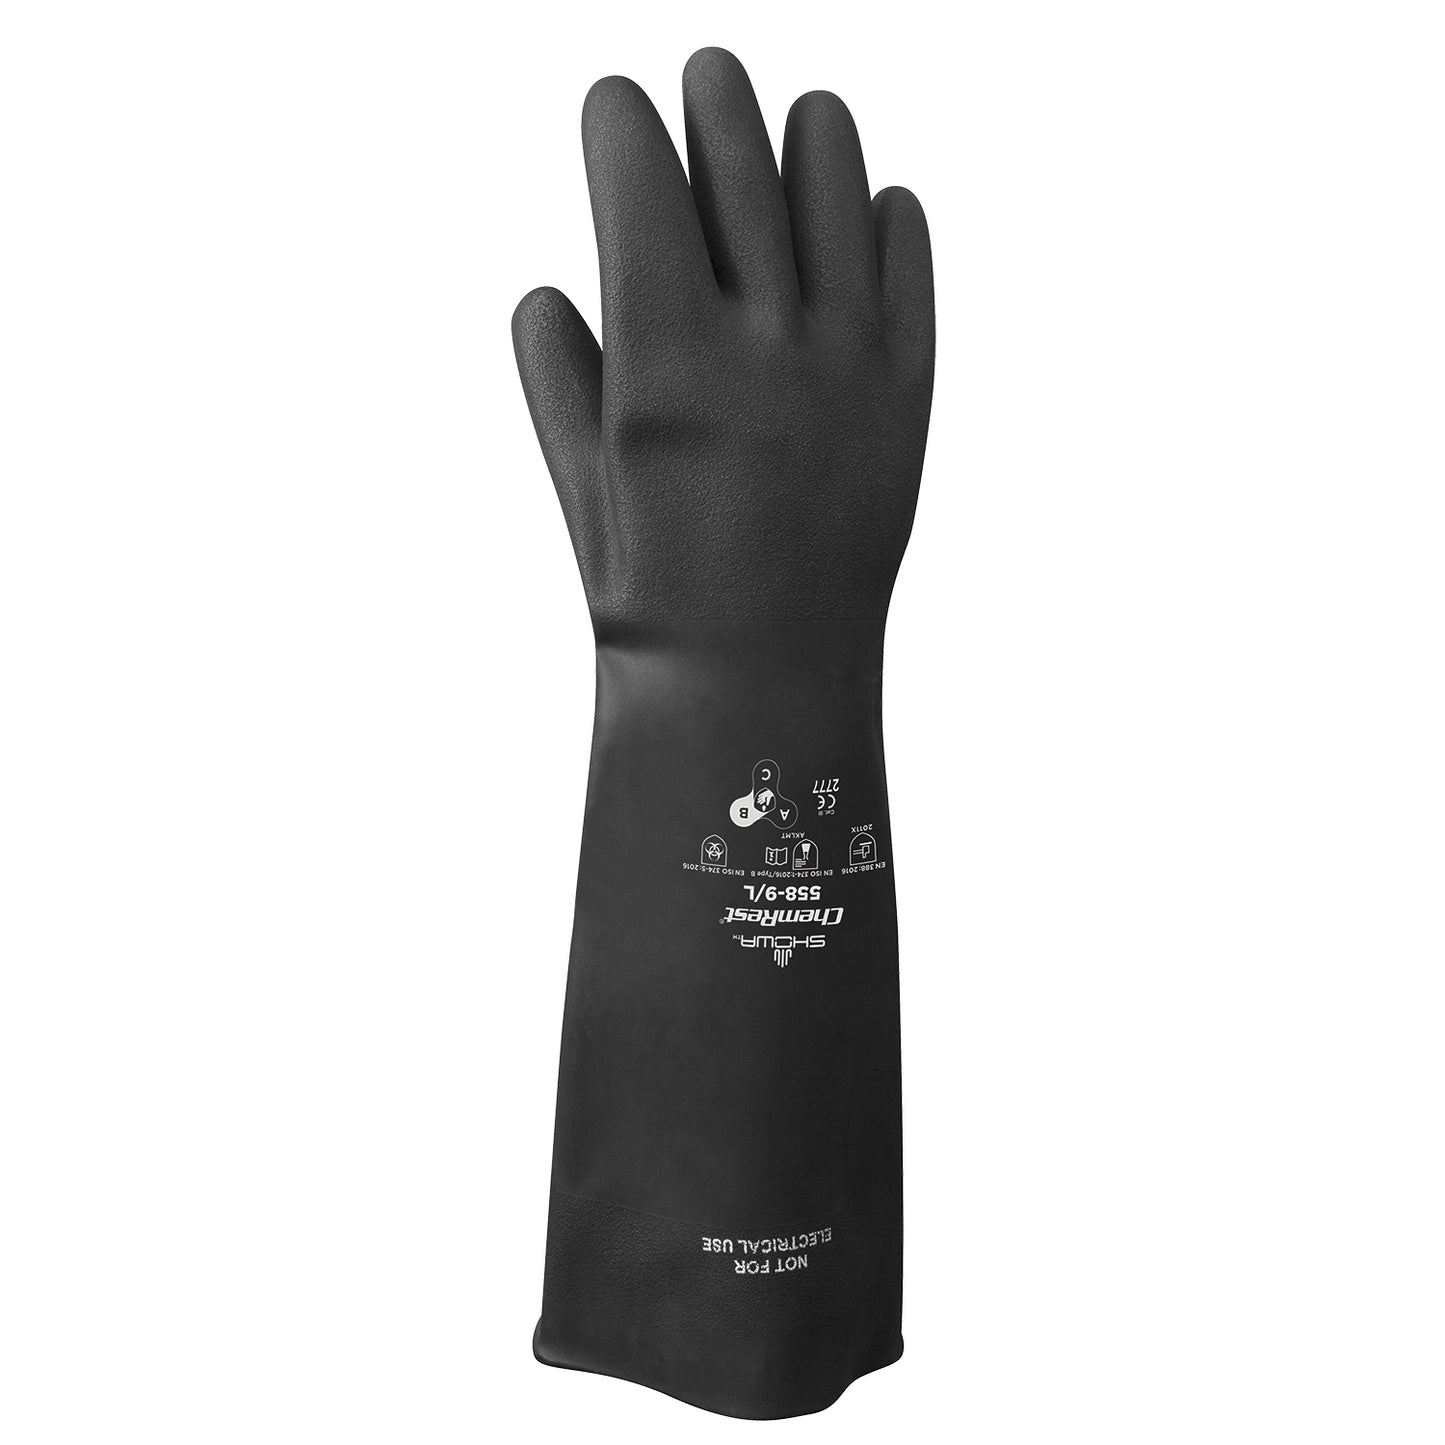 45010 18" Heavy Duty Chemical Resistant Gloves, Cotton Jersey Liner, PVC Coating, Size L-XL, Sold by Pair